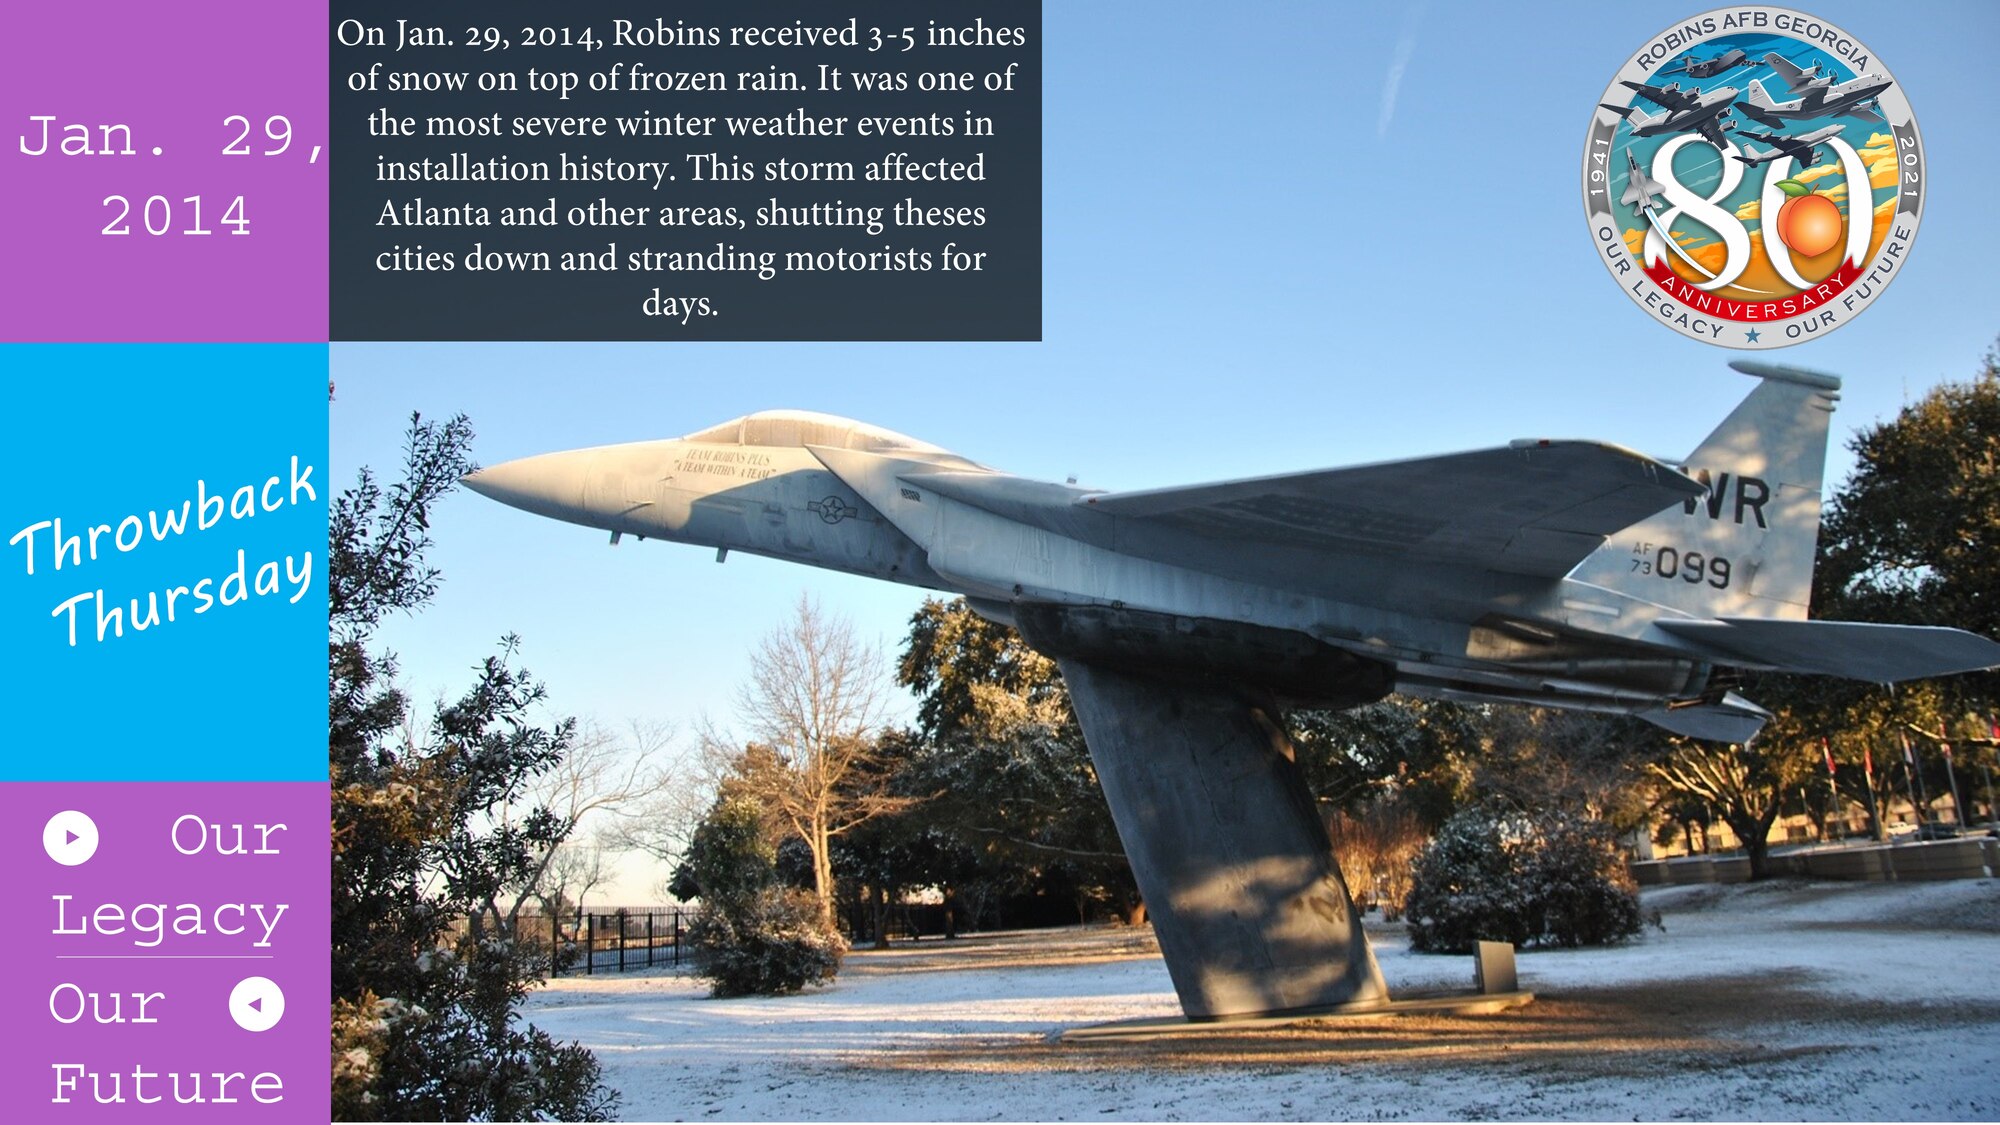 Graphic shows snow and ice covered static aircraft next to Throwback Thursday fact.